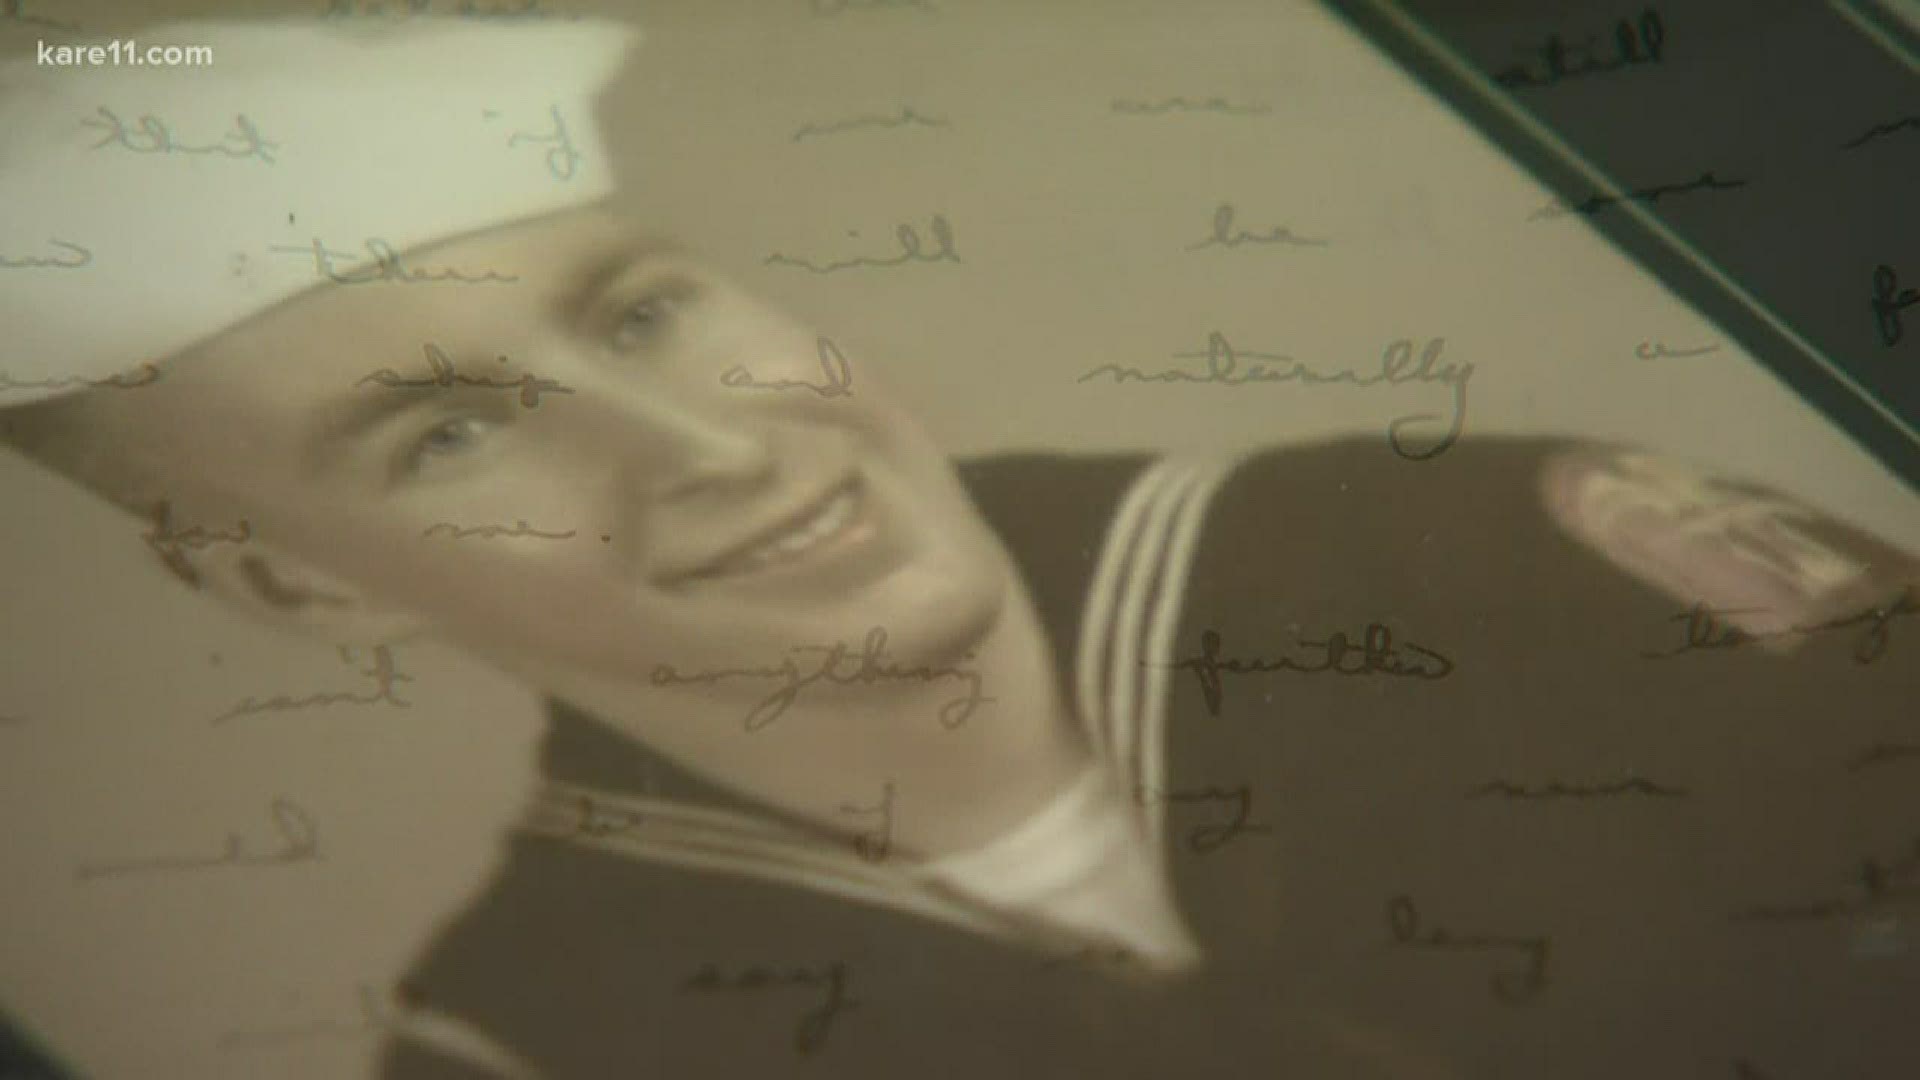 Stuck at home during COVID-19, a Duluth man is transcribing the letters his dad sent home, daily, during 2 1/2 years in WWII - nearly 1000 of them.